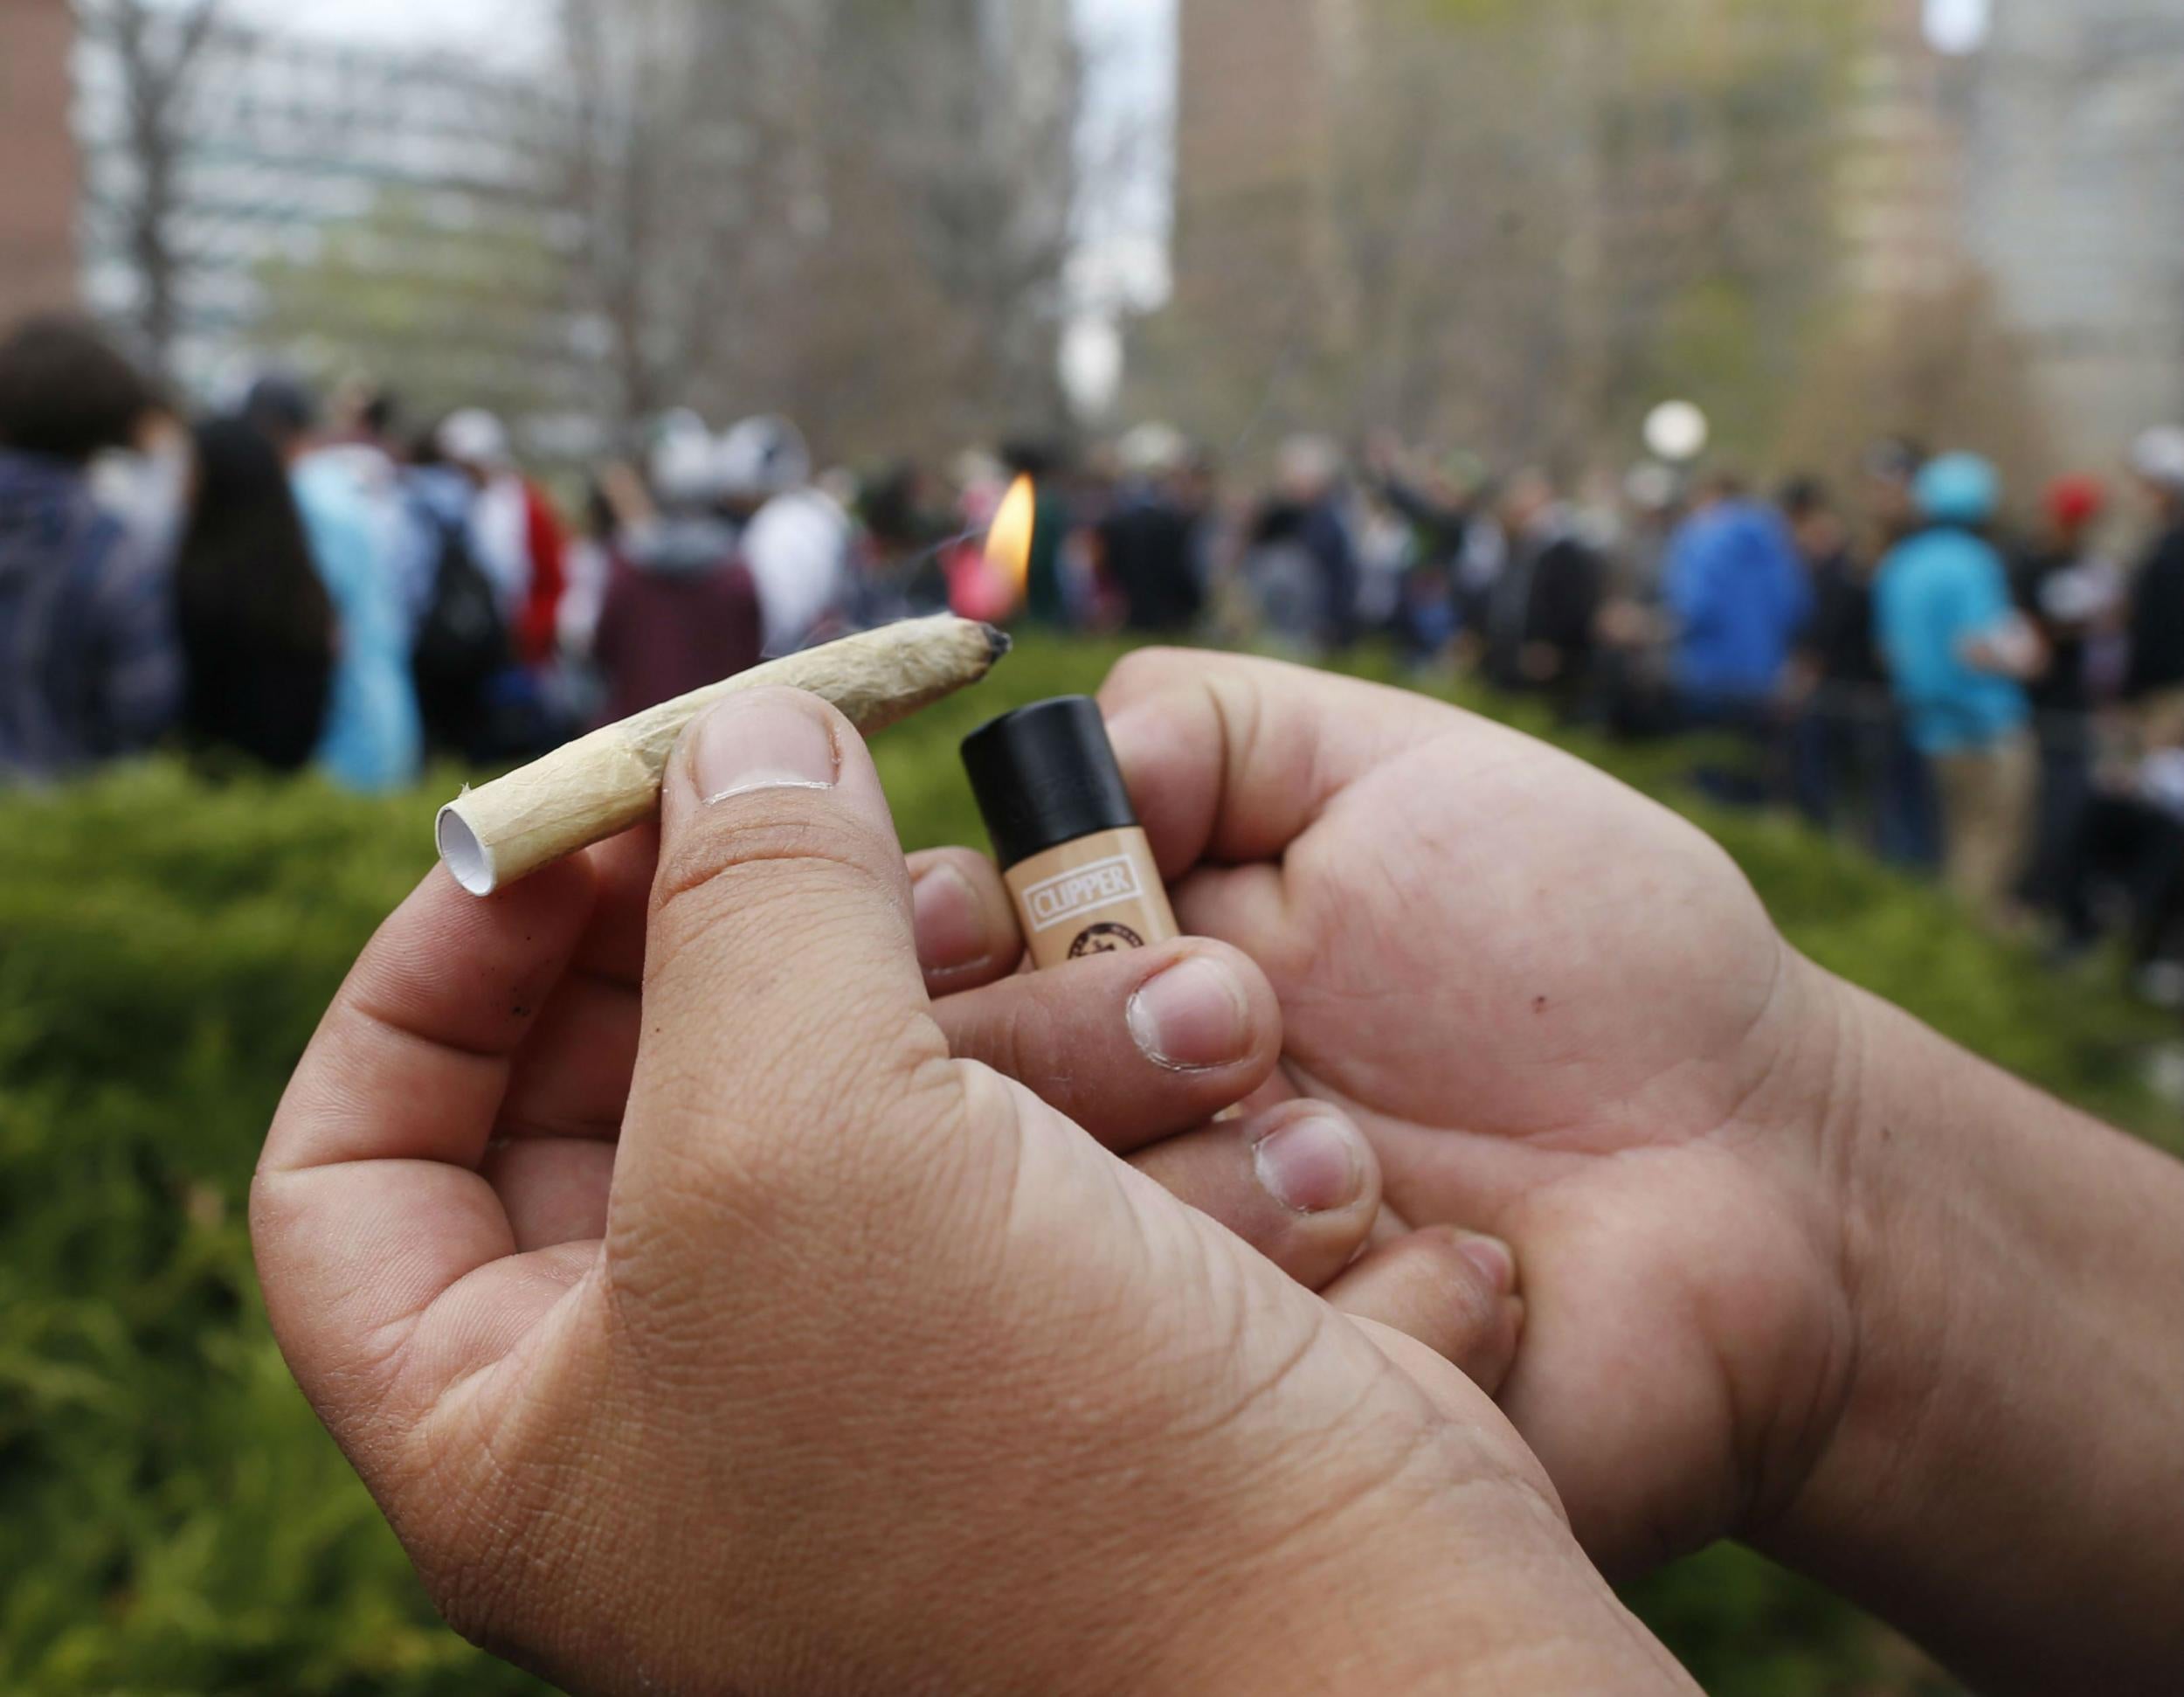 The activists intend to hand out 4,200 joints